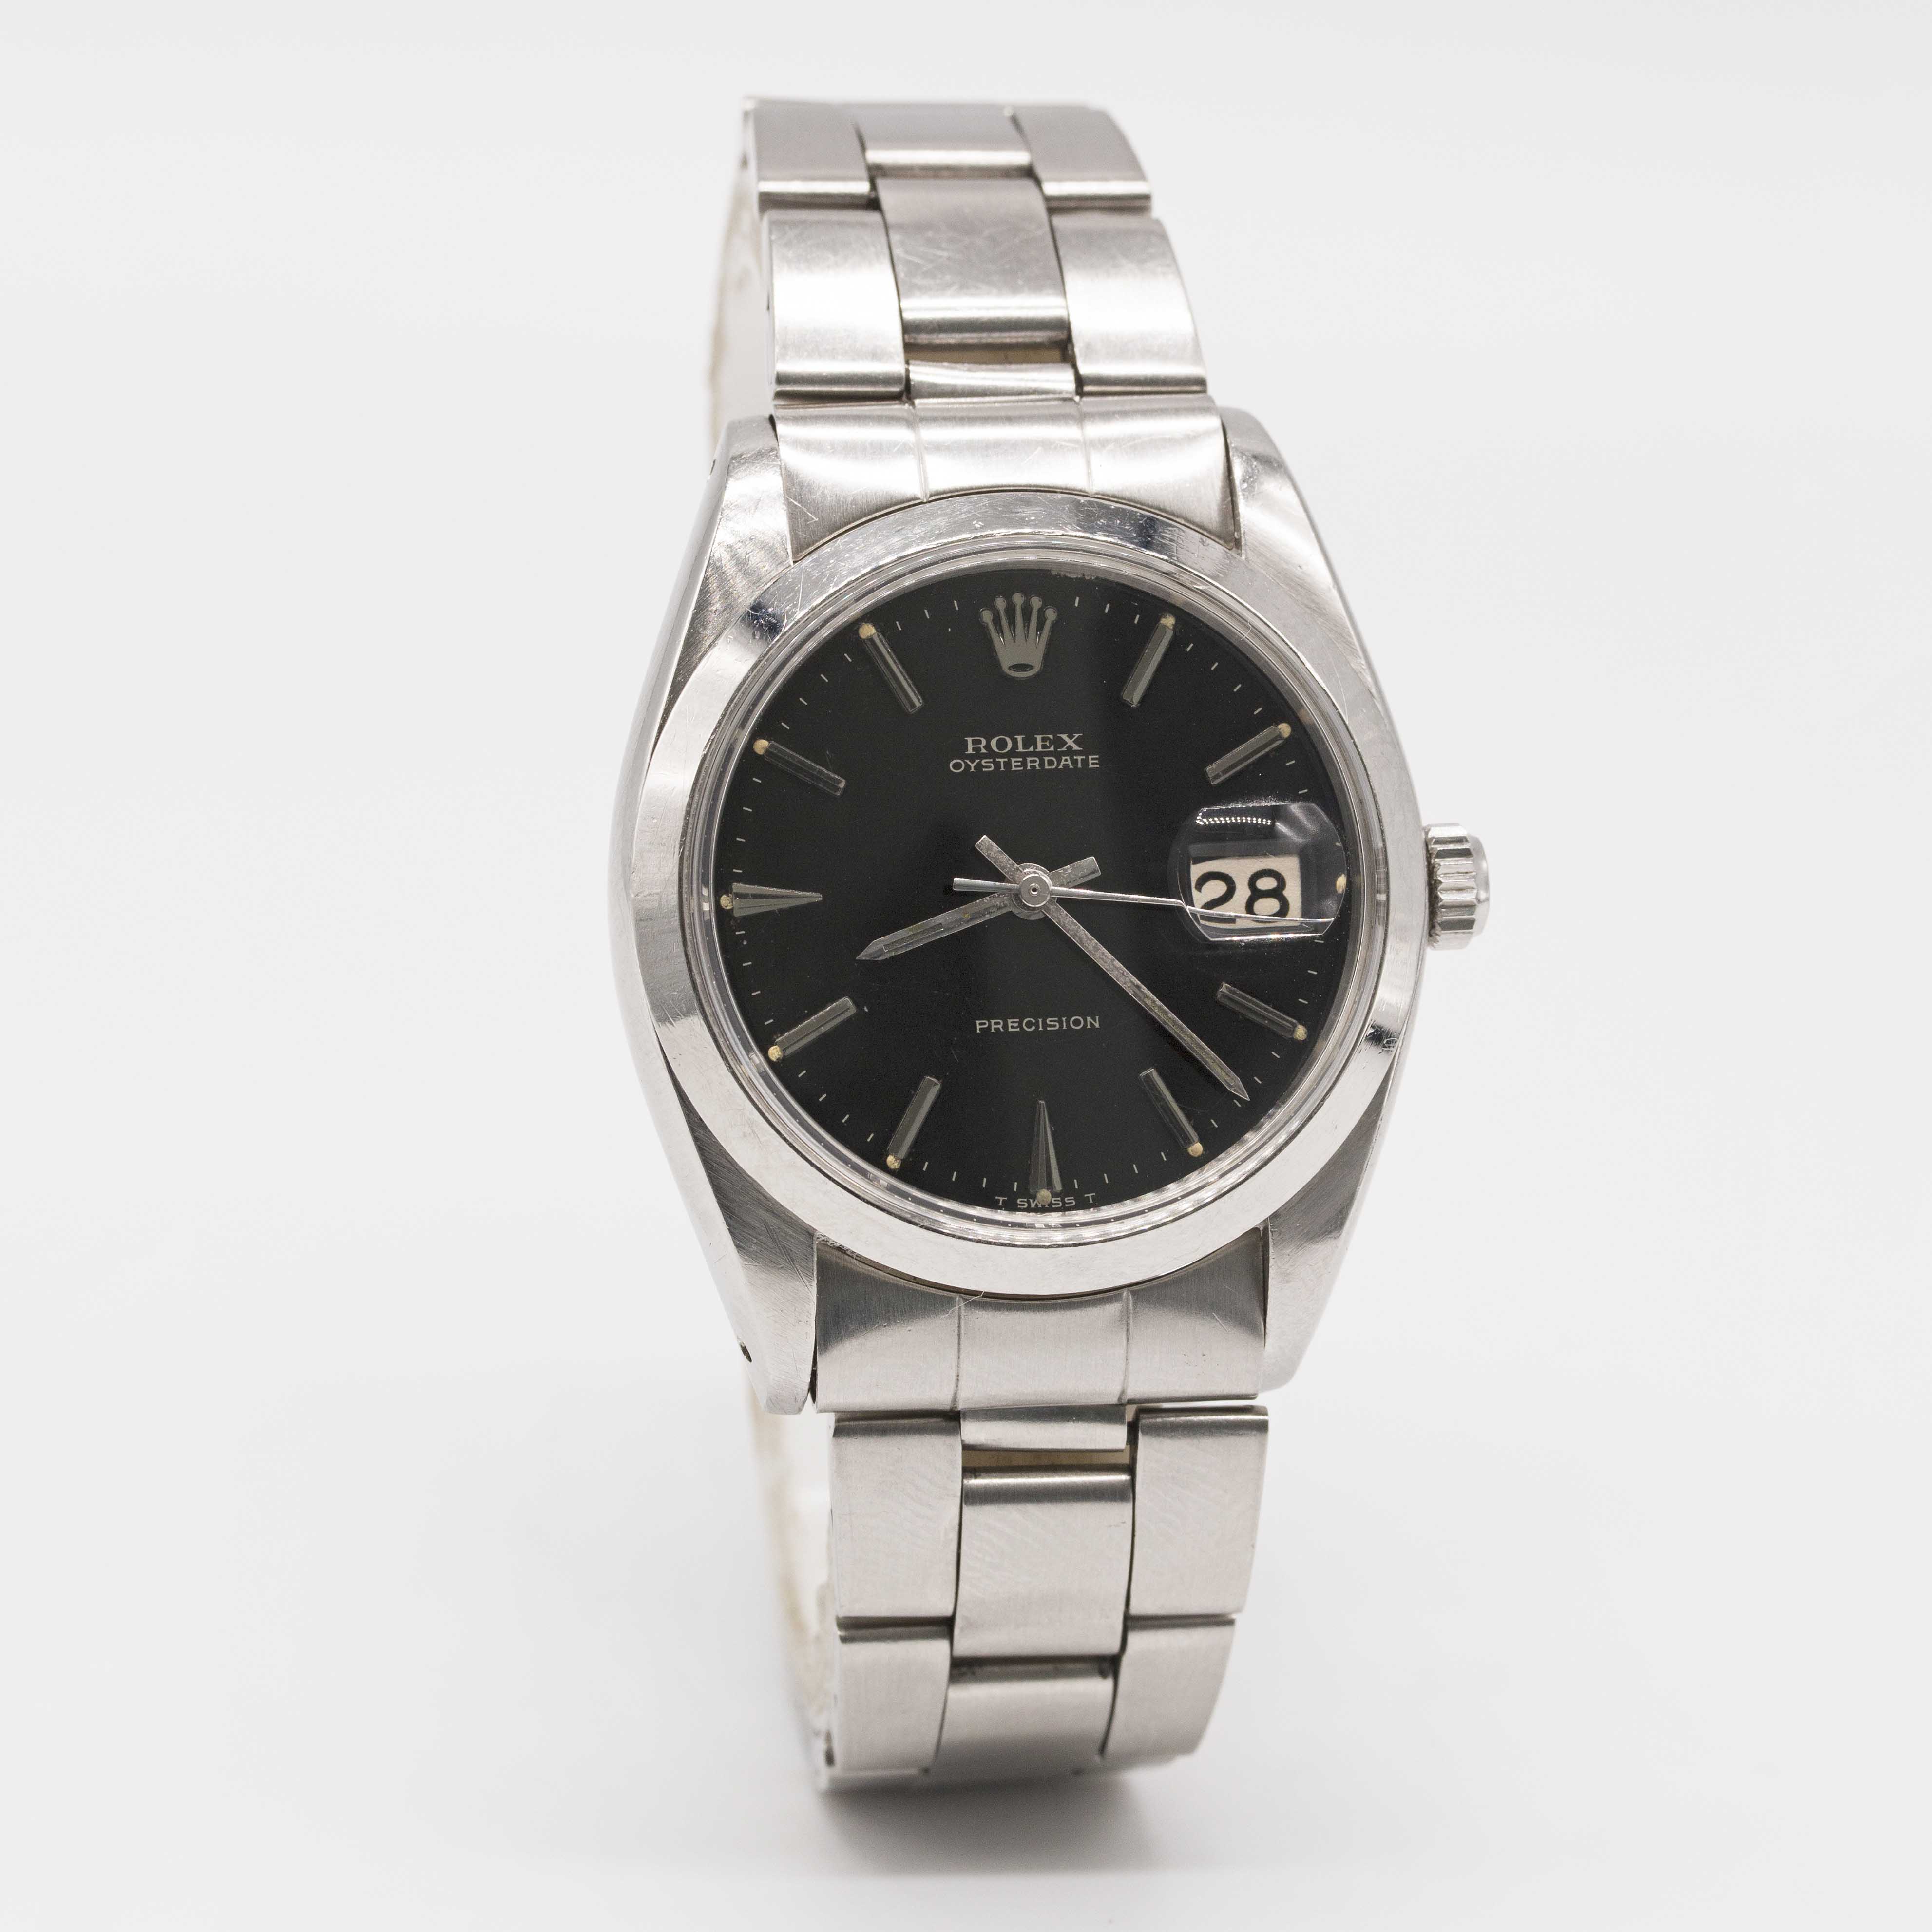 A GENTLEMAN'S STAINLESS STEEL ROLEX OYSTERDATE PRECISION BRACELET WATCH CIRCA 1966, REF. 6694 WITH - Image 5 of 10